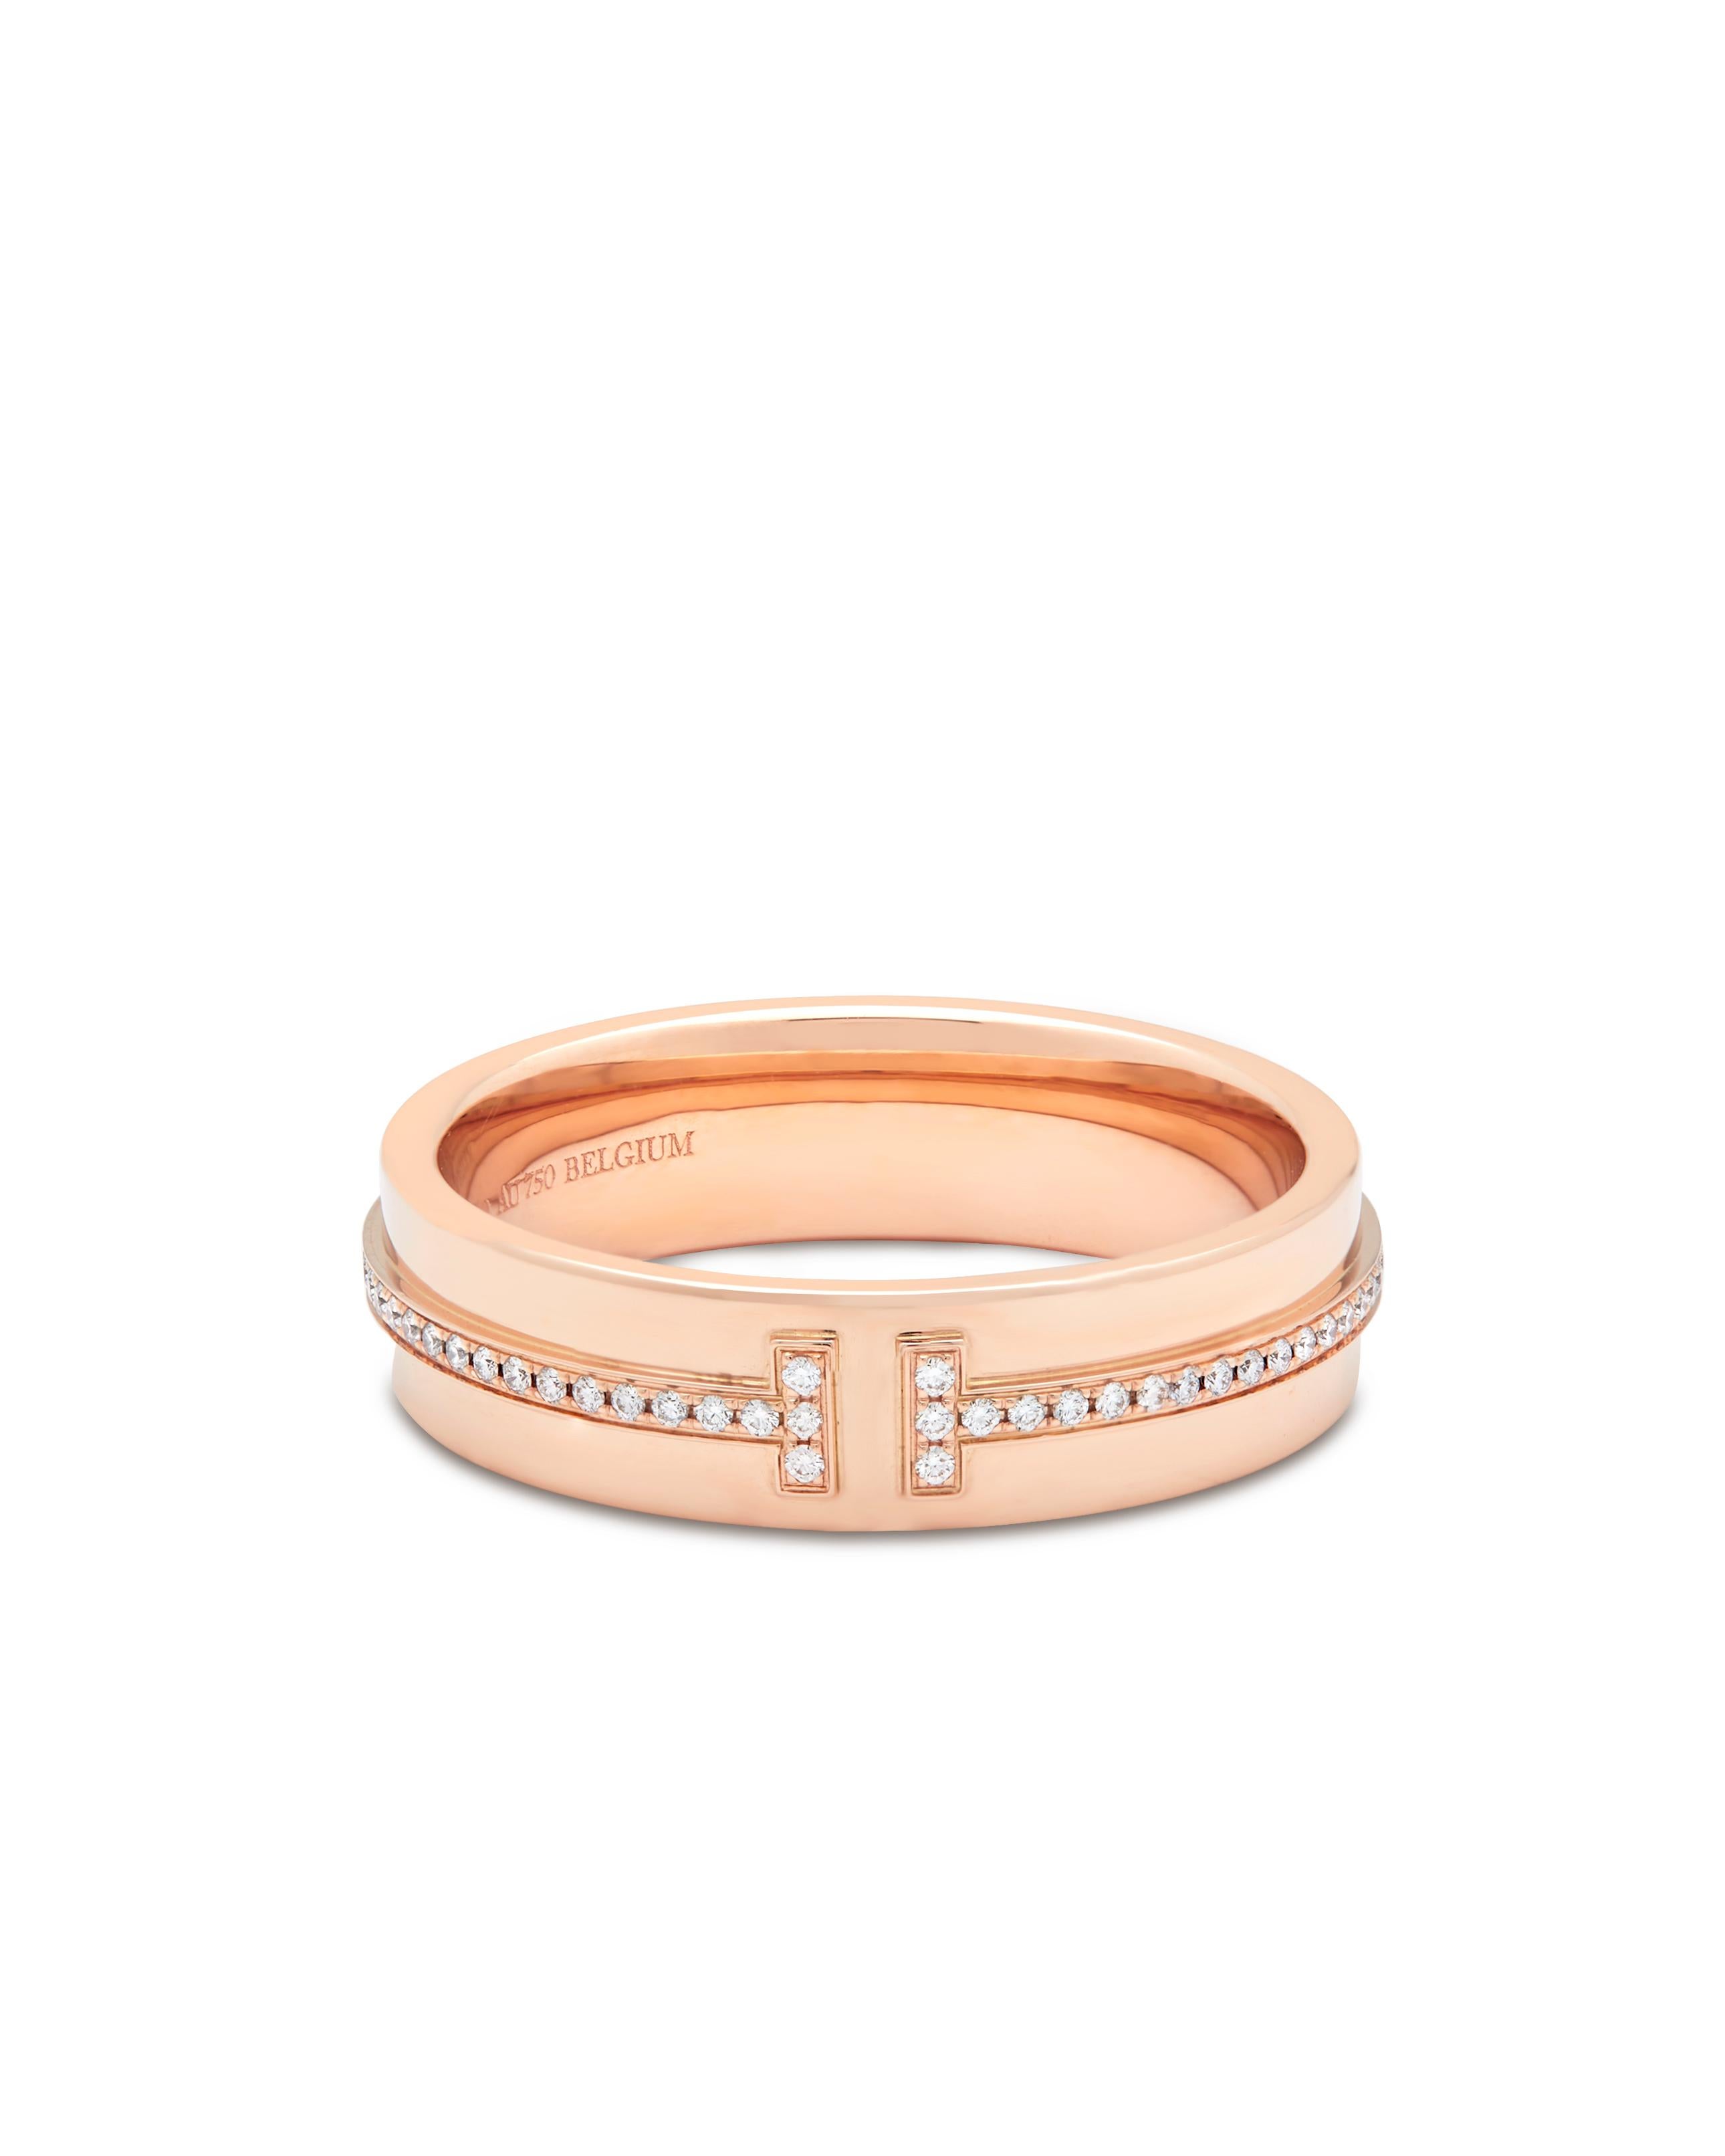 Tiffany Rose gold diamond T ring model number 60151041

This Iconic design is a contemporary piece, set with diamonds inlaid into the T.

Signed Tiffany & Co Belguim

18k rose gold with round brilliant diamonds
Size 58 European: UK Size Q and a